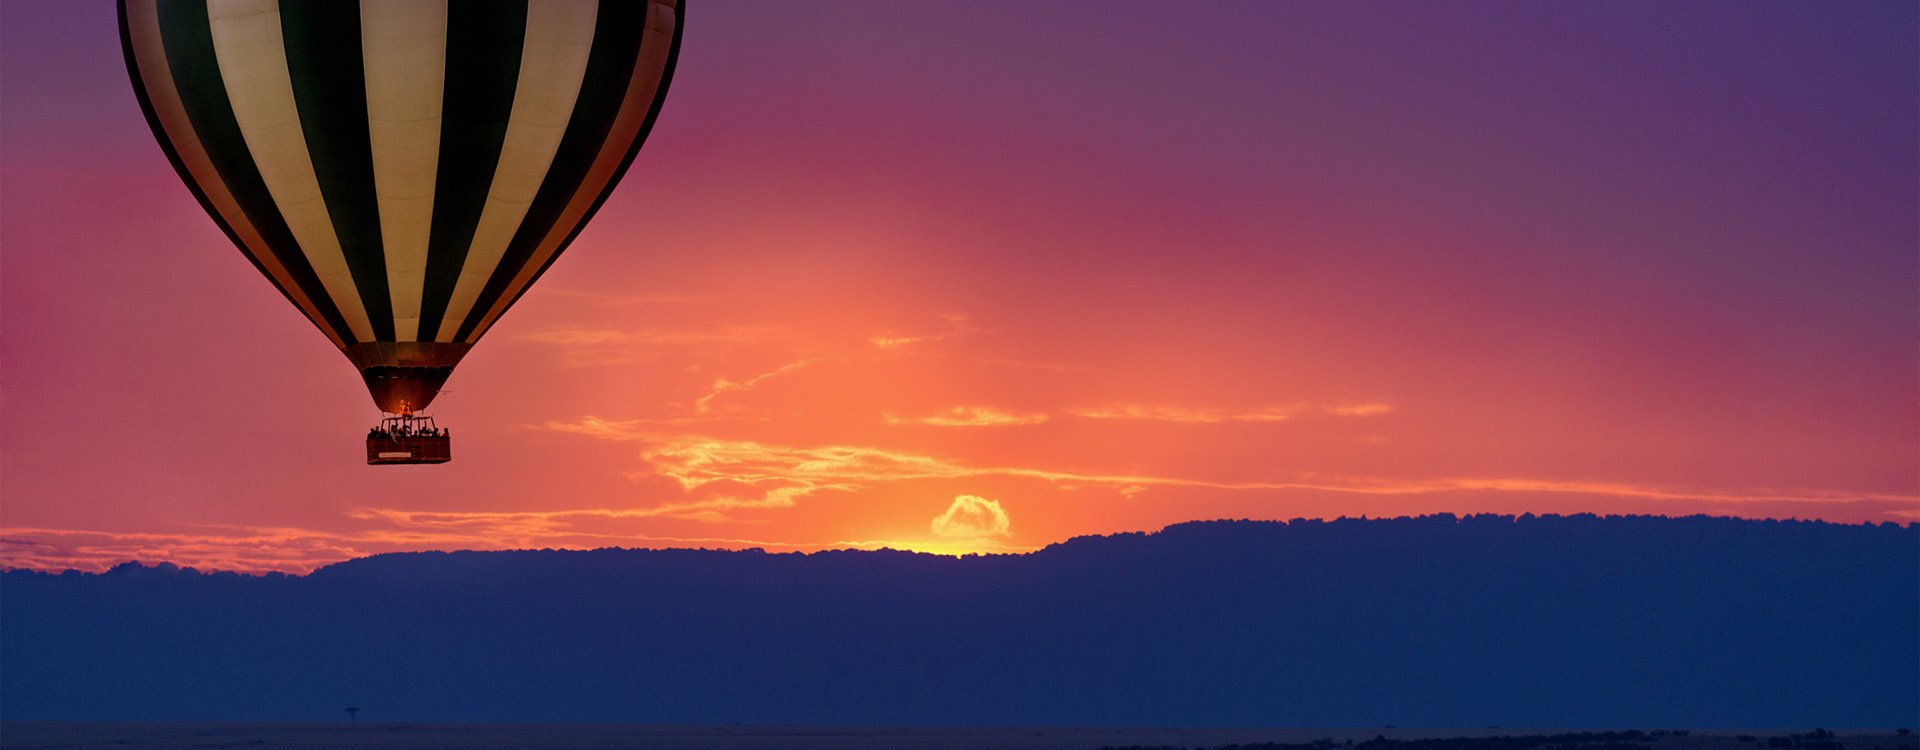 Hot air balloon safari flight in the magnificent setting of the Great Rift Valley in Kenya